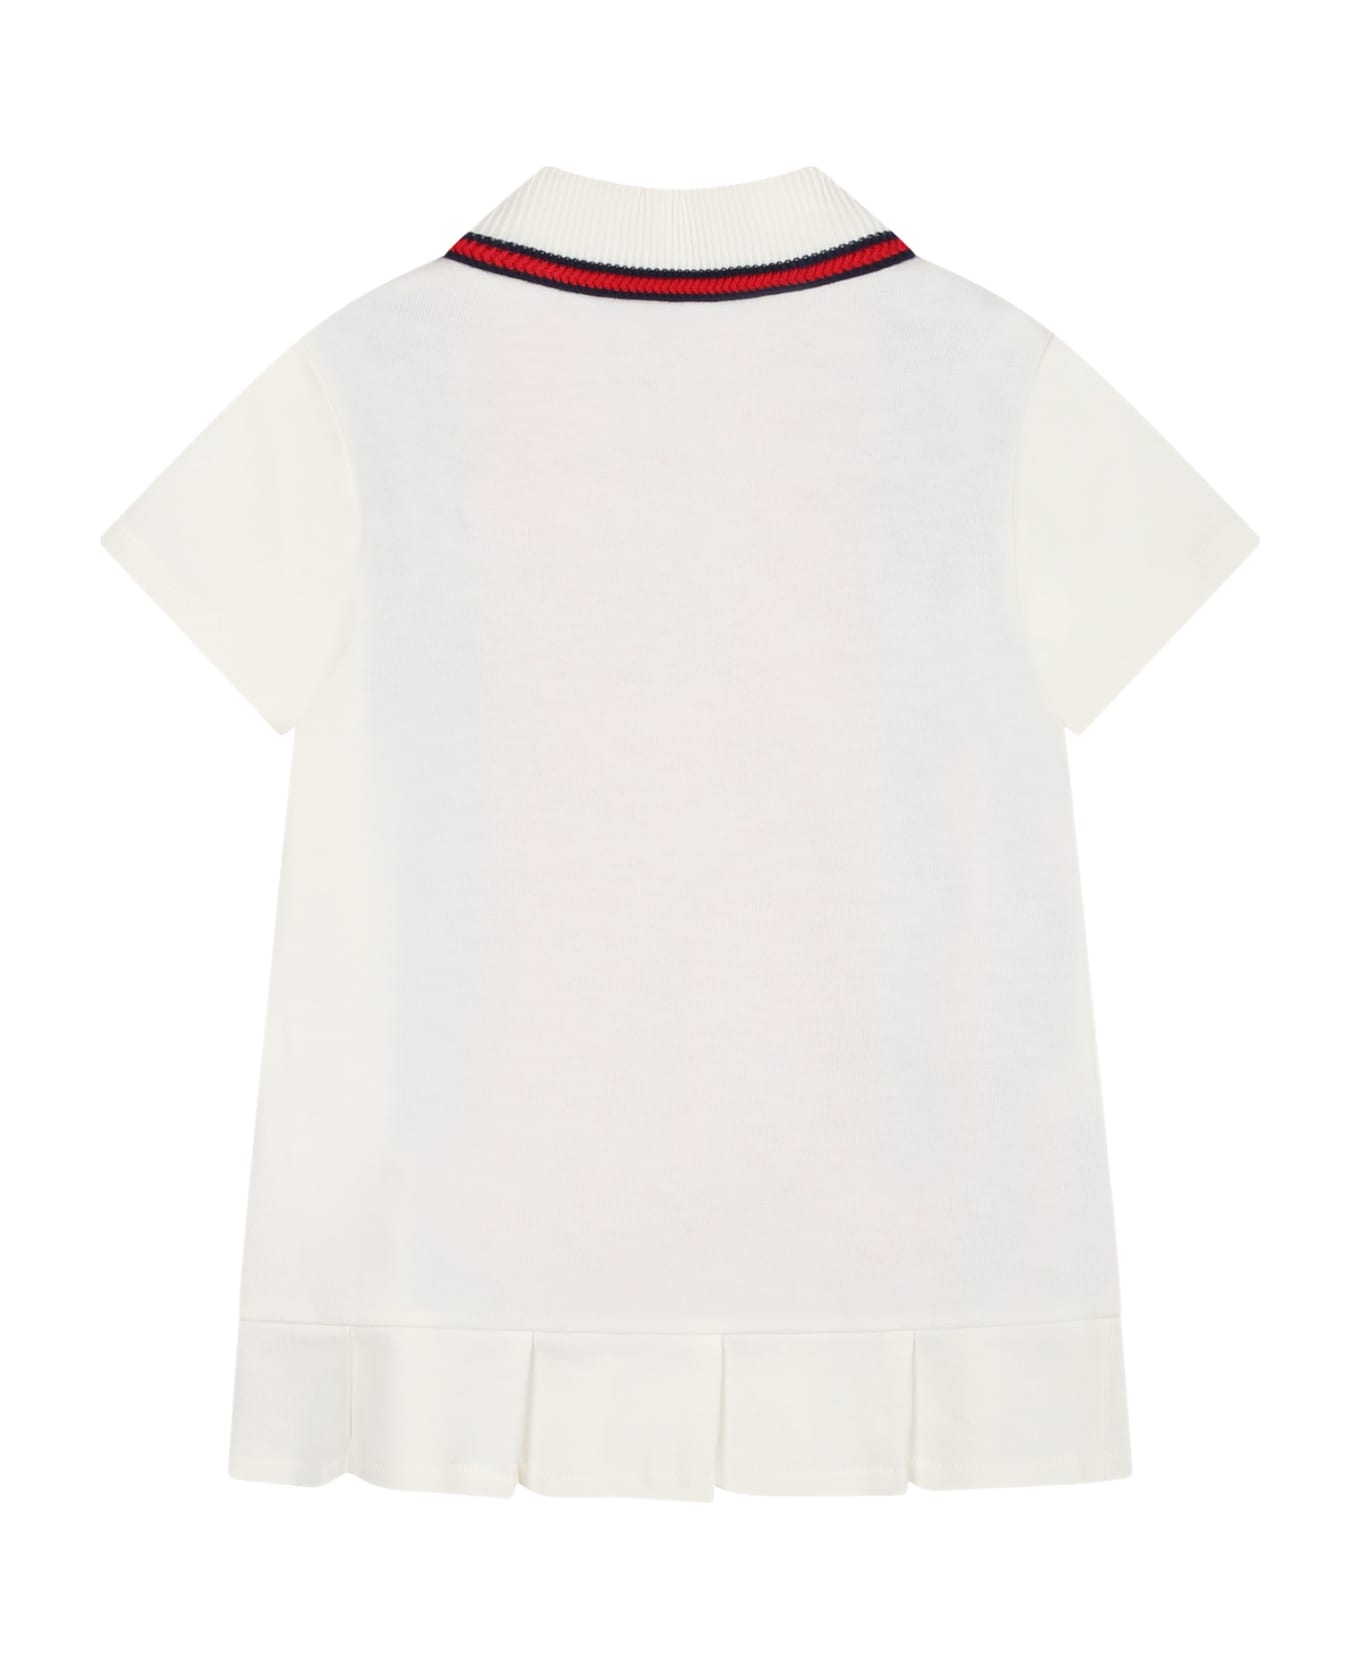 Gucci White Dress For Baby Girl With Blue And Red Bands - White